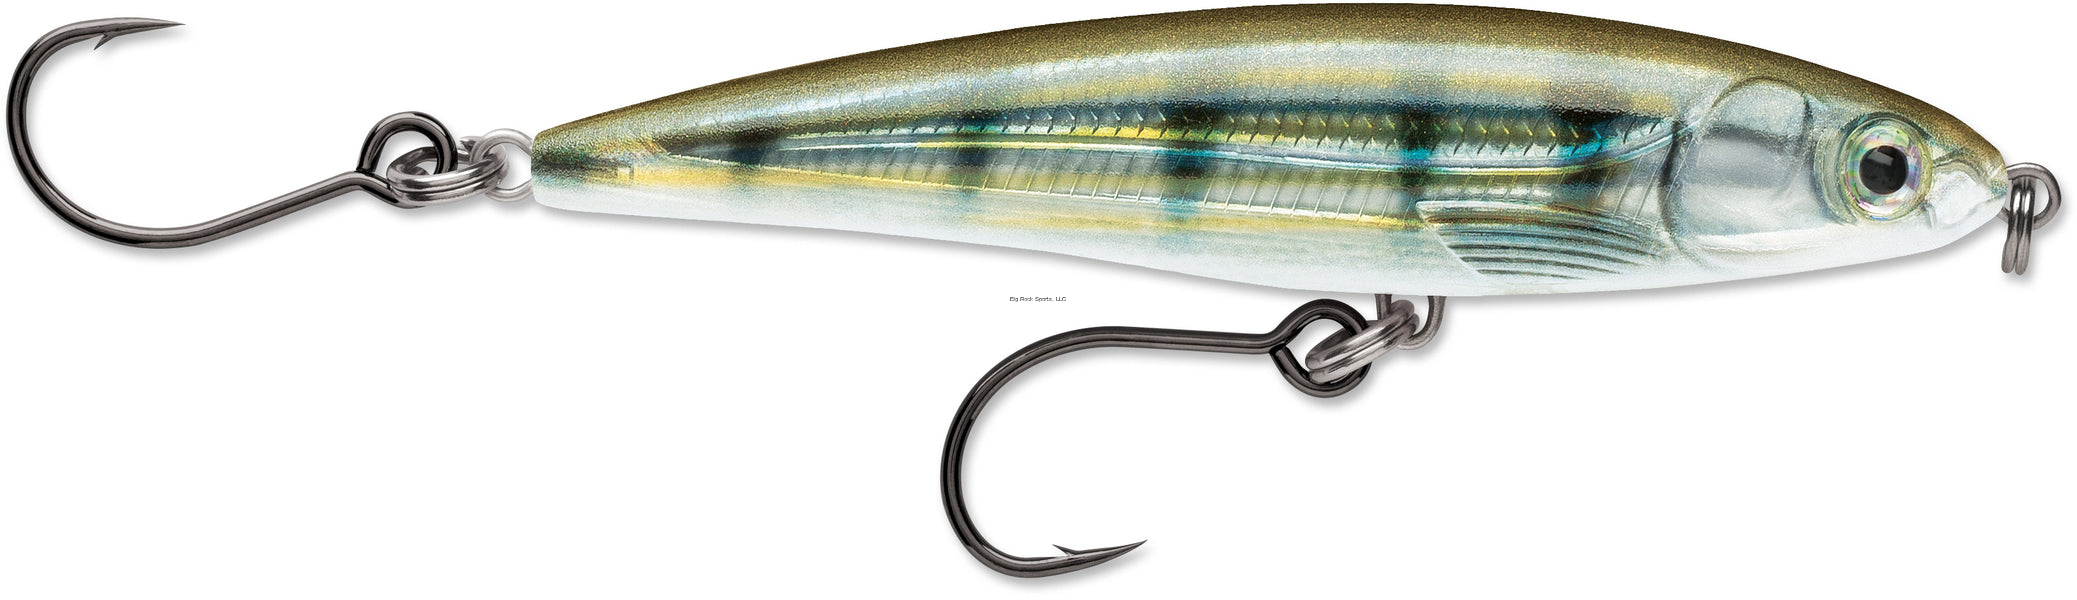 Rapala X-Rap Saltwater SXR10 Fishing Lure, 4" (Assorted Colors)